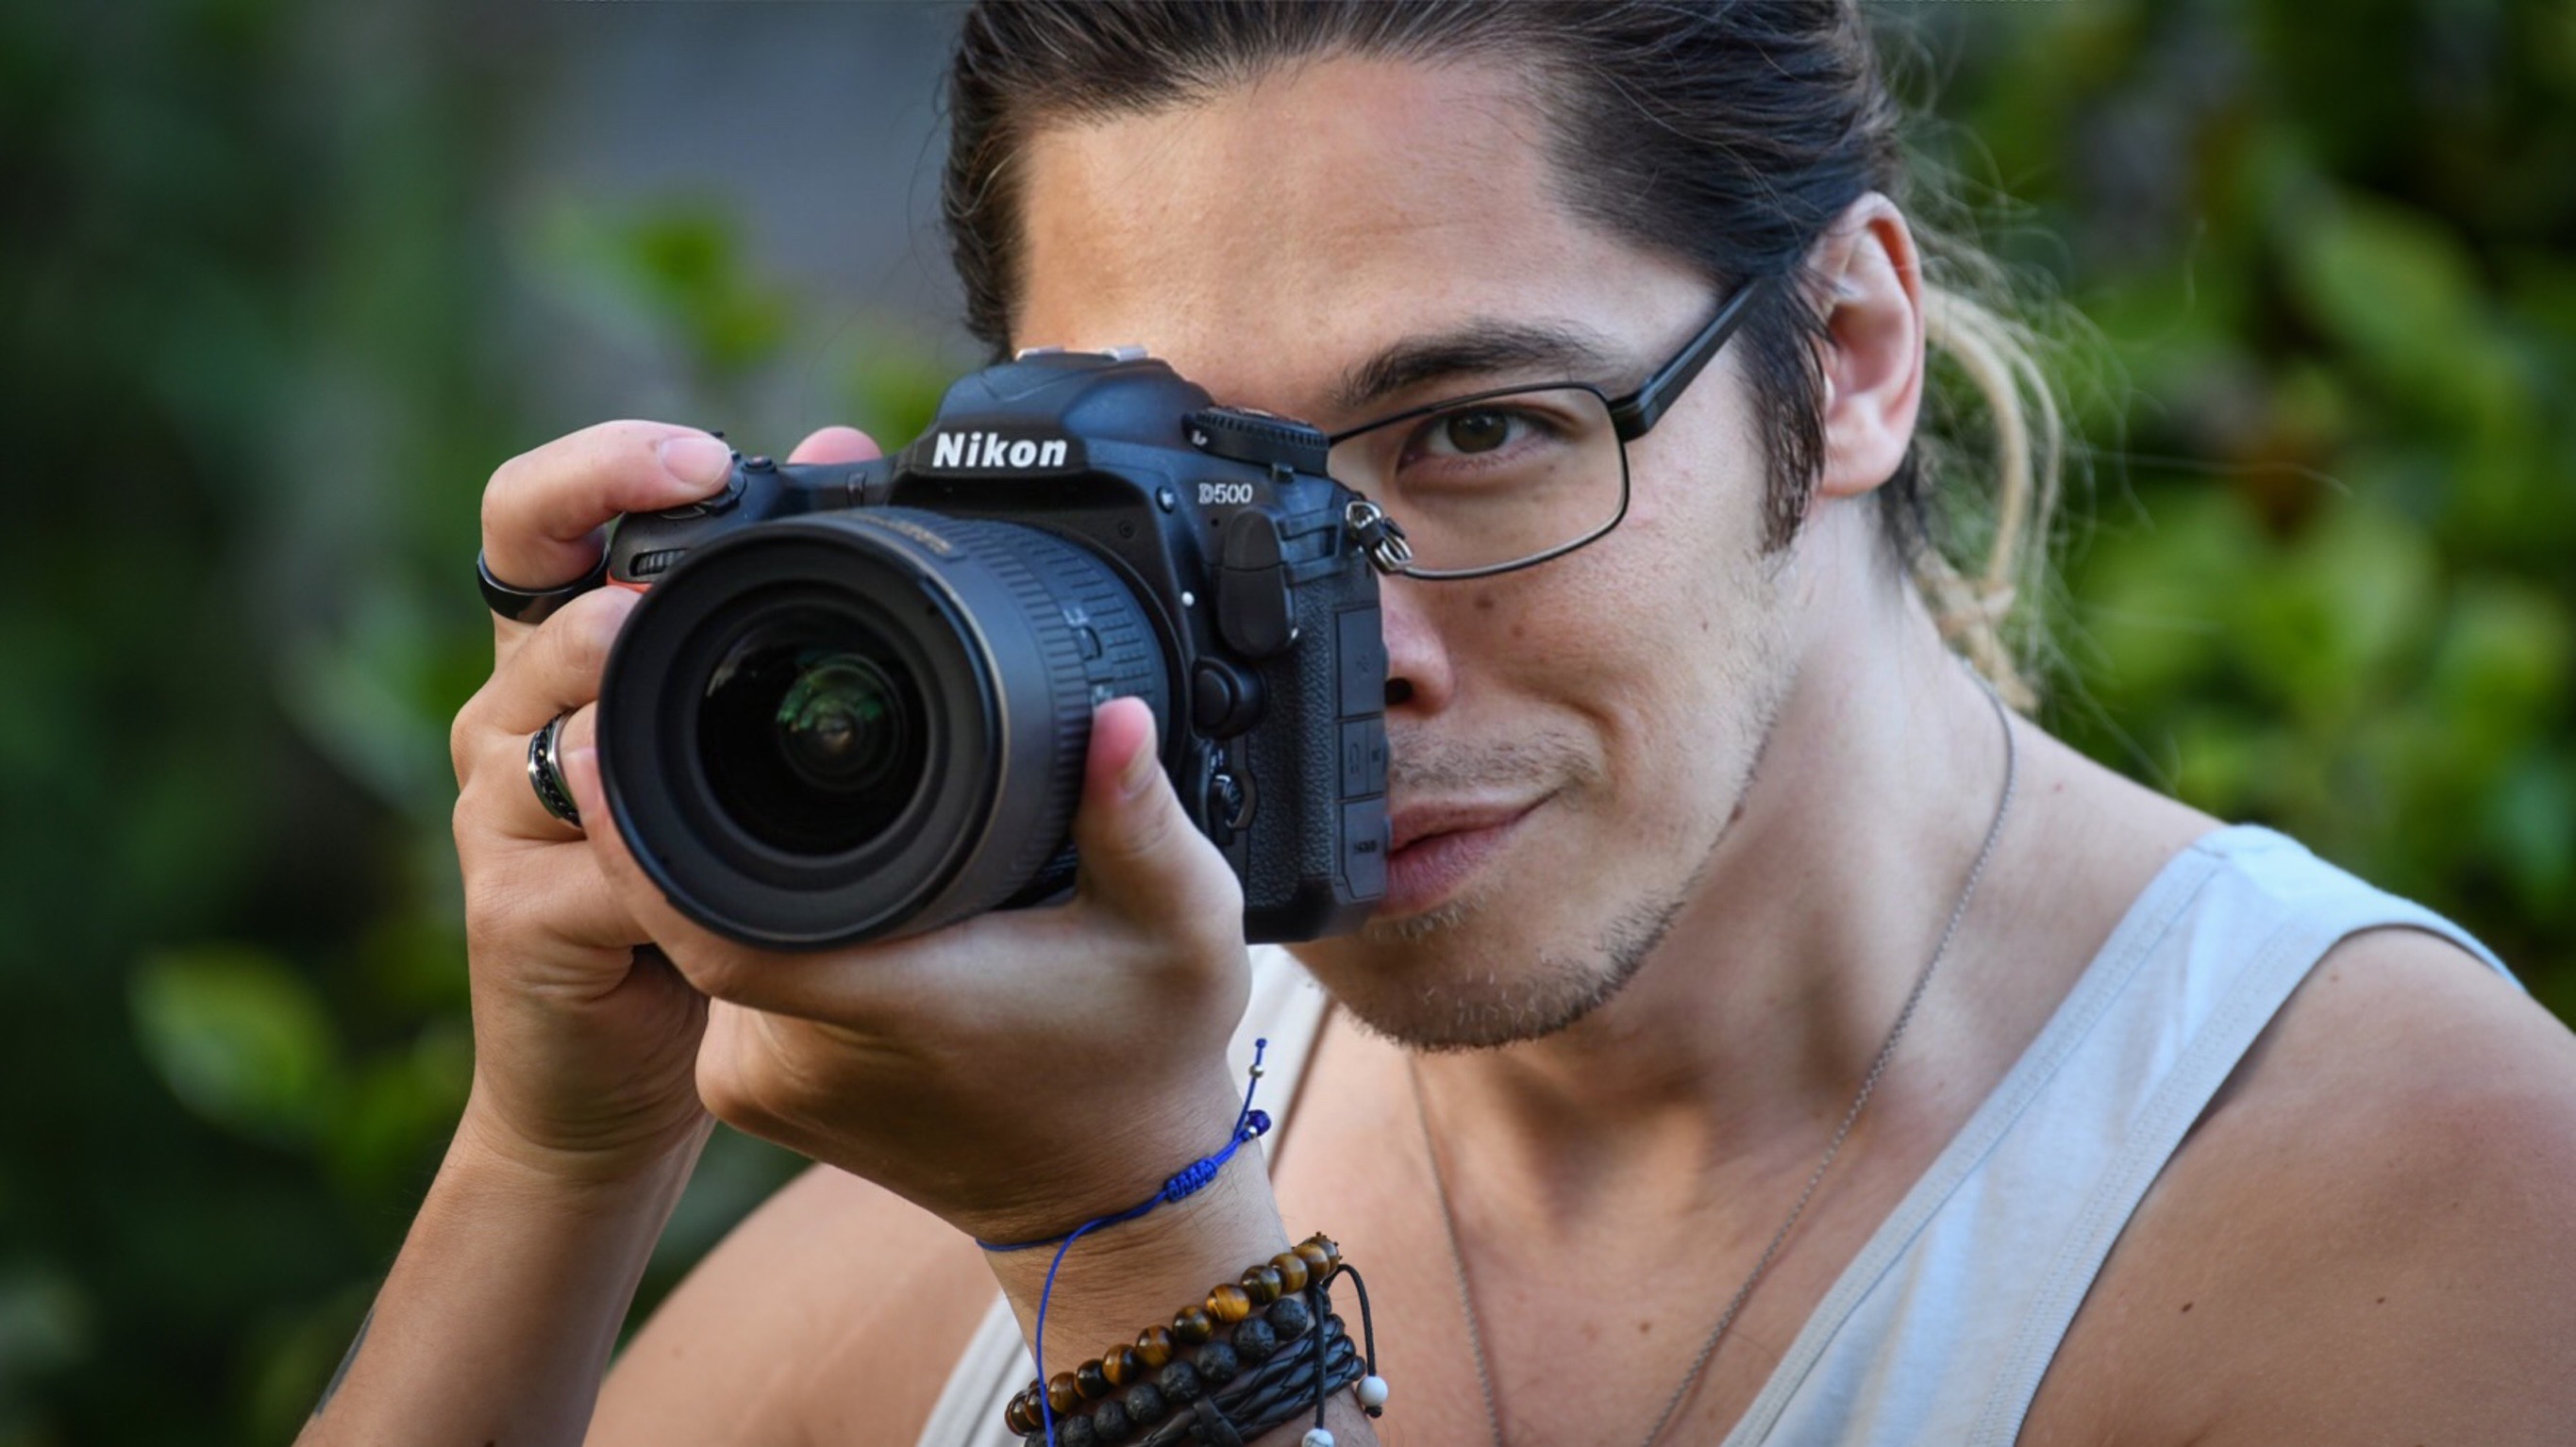 Nikon D500 review: The D500 scores on almost all counts - CNET